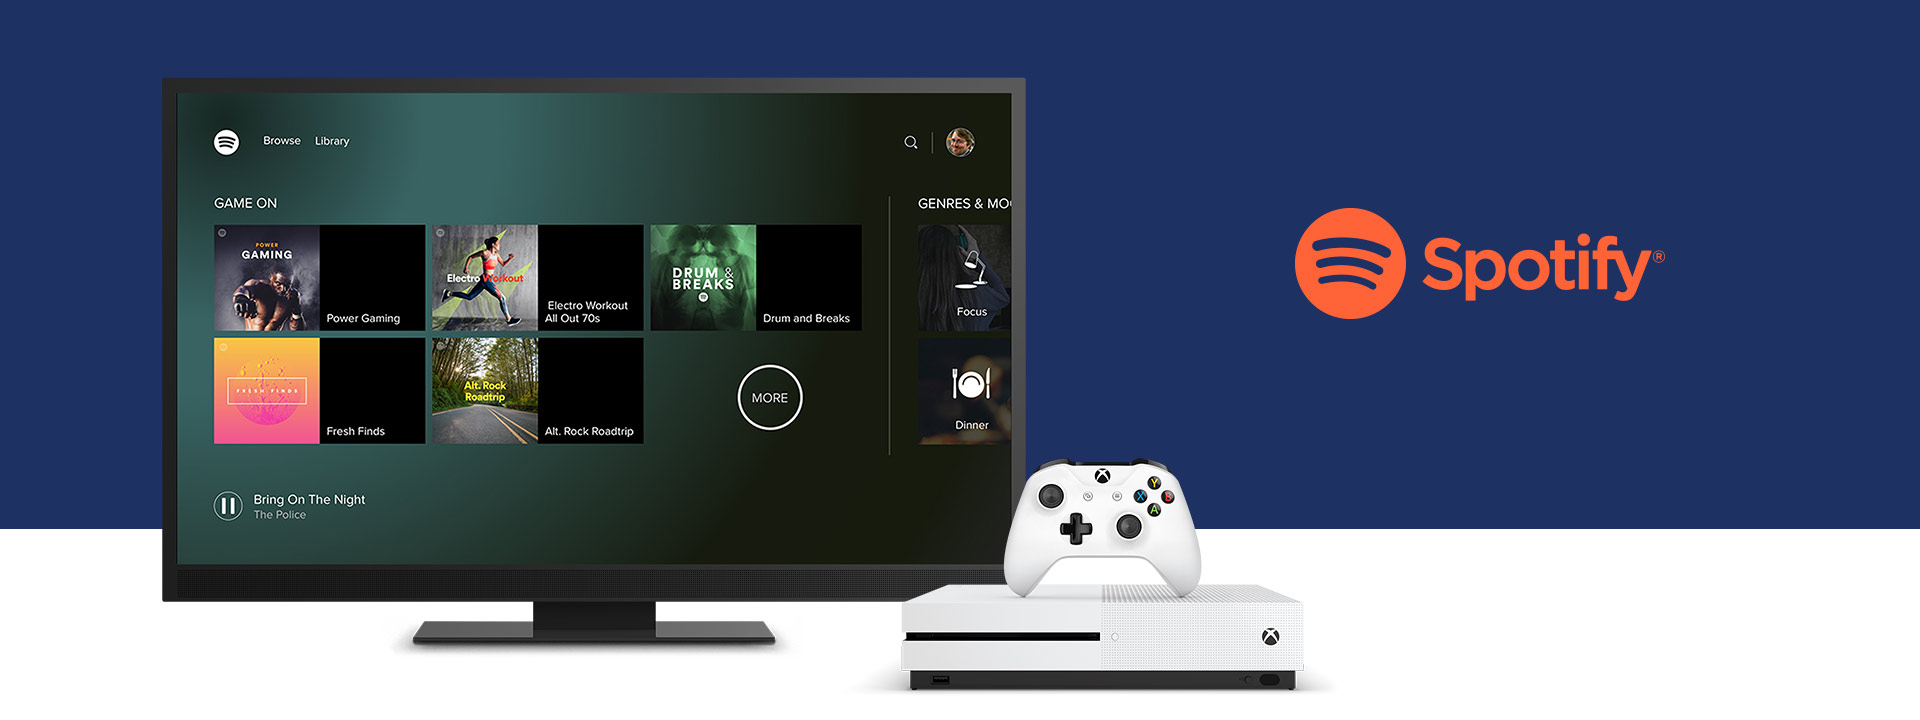 how to get spotify premium with xbox game pass ultimate